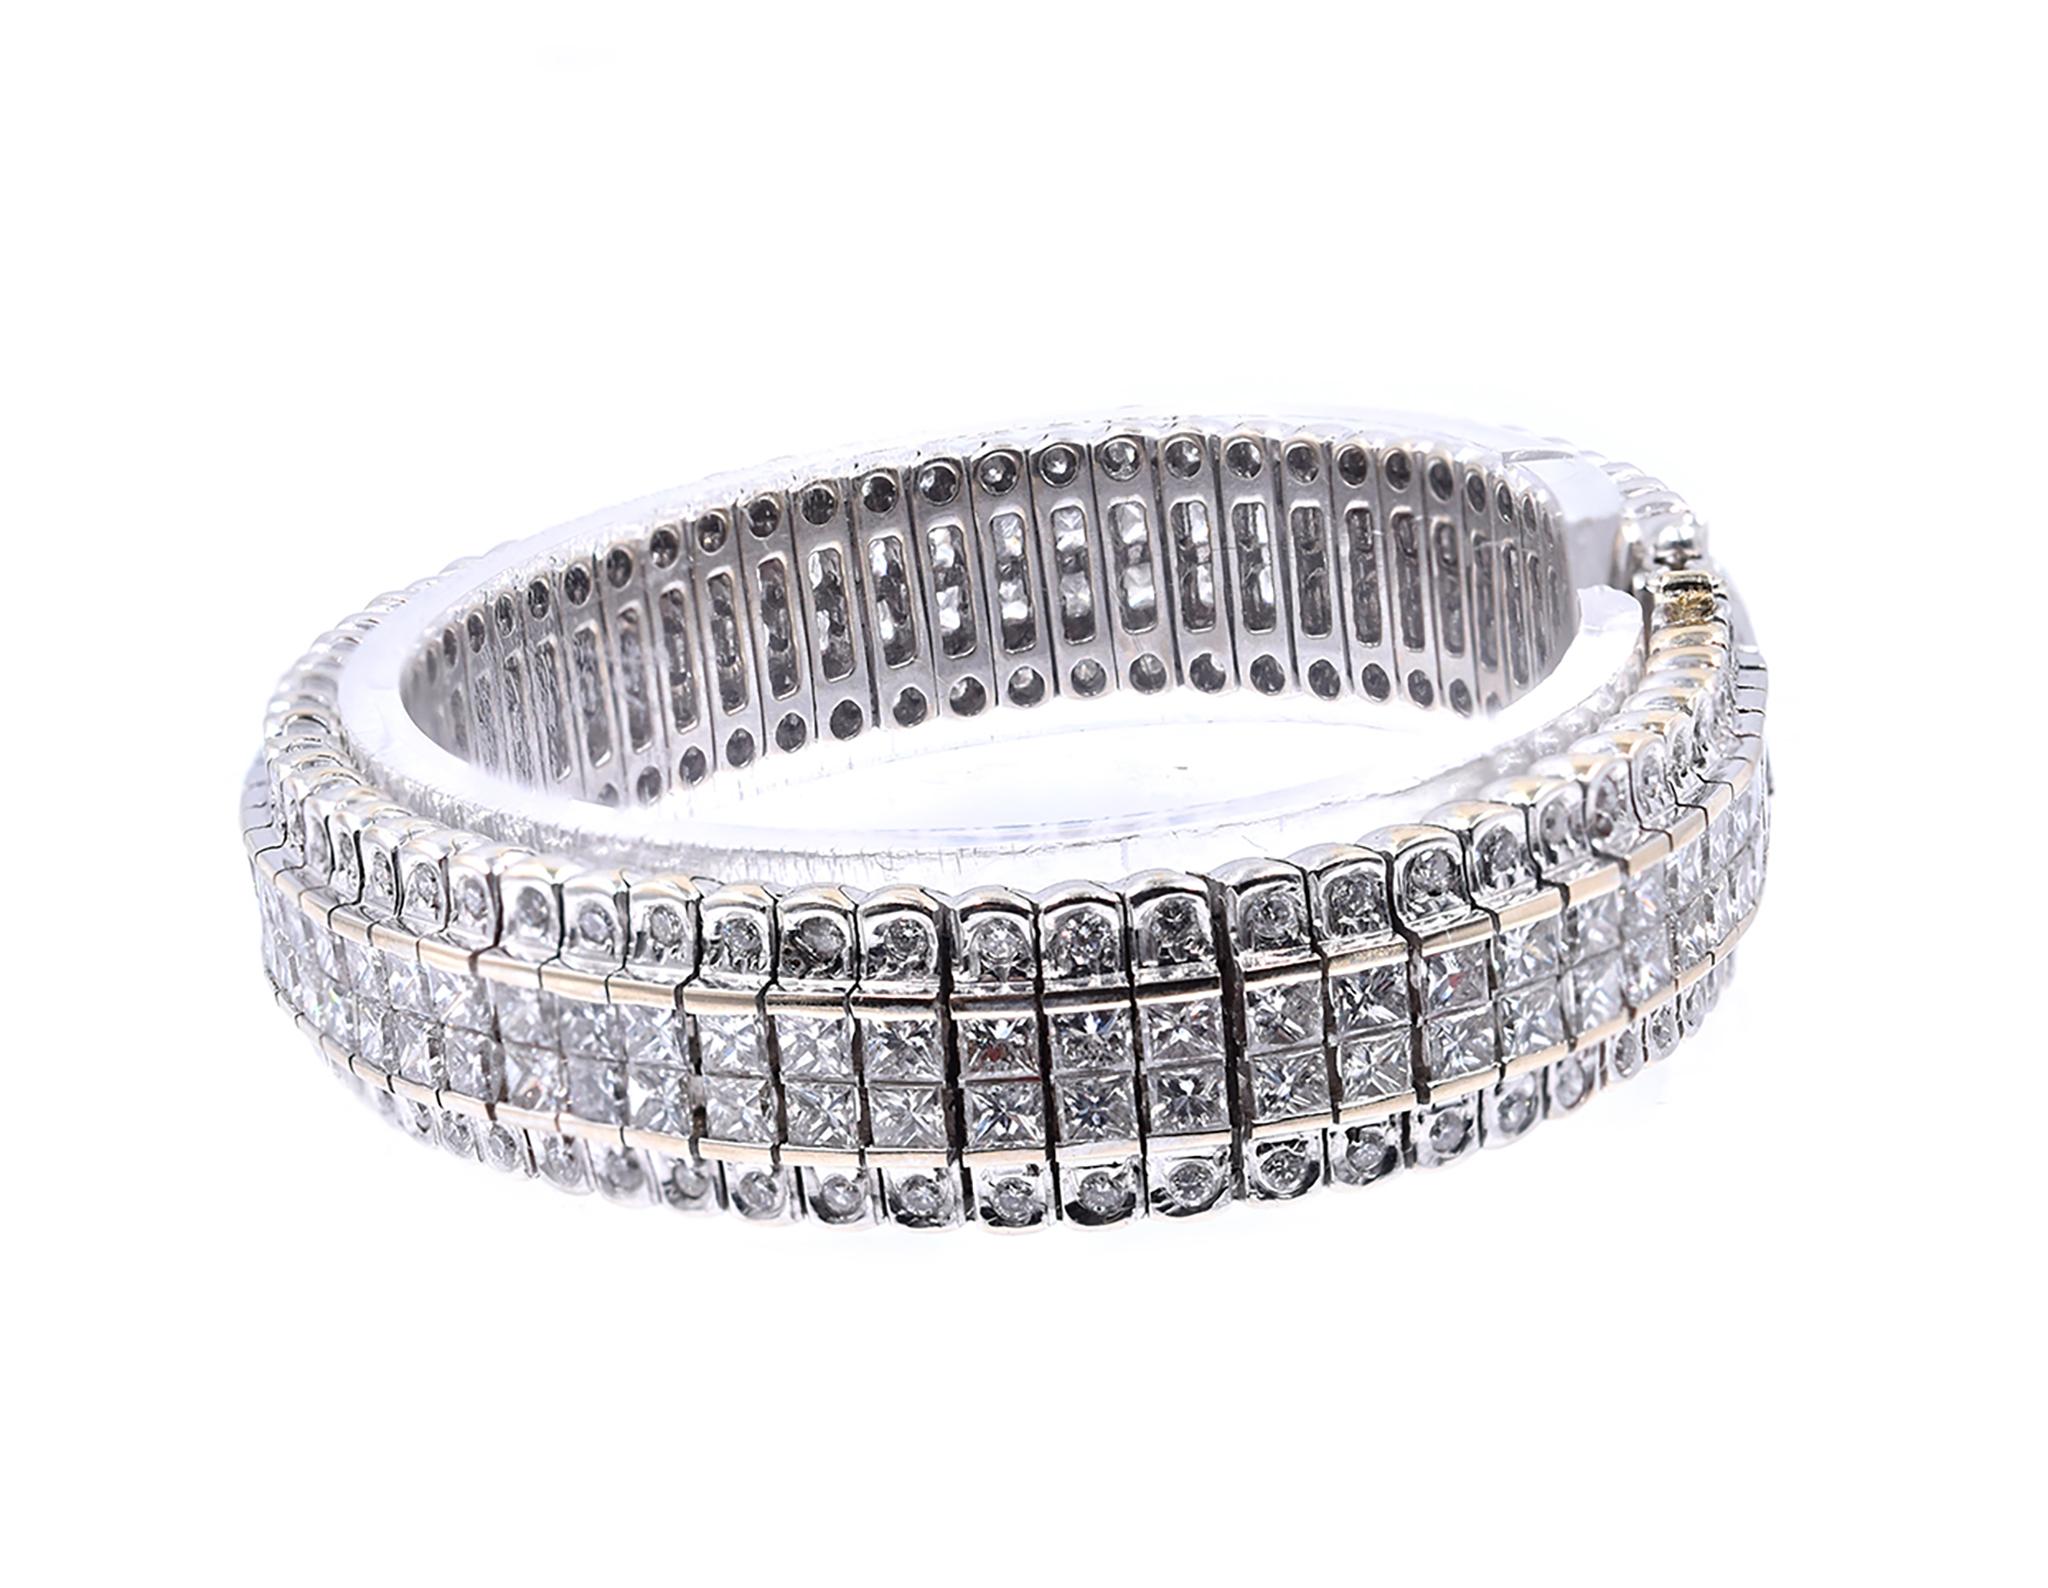 Designer: custom
Material: 18K white gold
Diamonds: 132 round brilliant cut = 1.78cttw
Color: F/G
Clarity: VS1-2
Diamonds: 132 princess cut = 12.08cttw
Color: F/G
Clarity: VS1-2
Dimensions: bracelet will fit up to a 7-inch wrist
Weight: 52.24 grams
